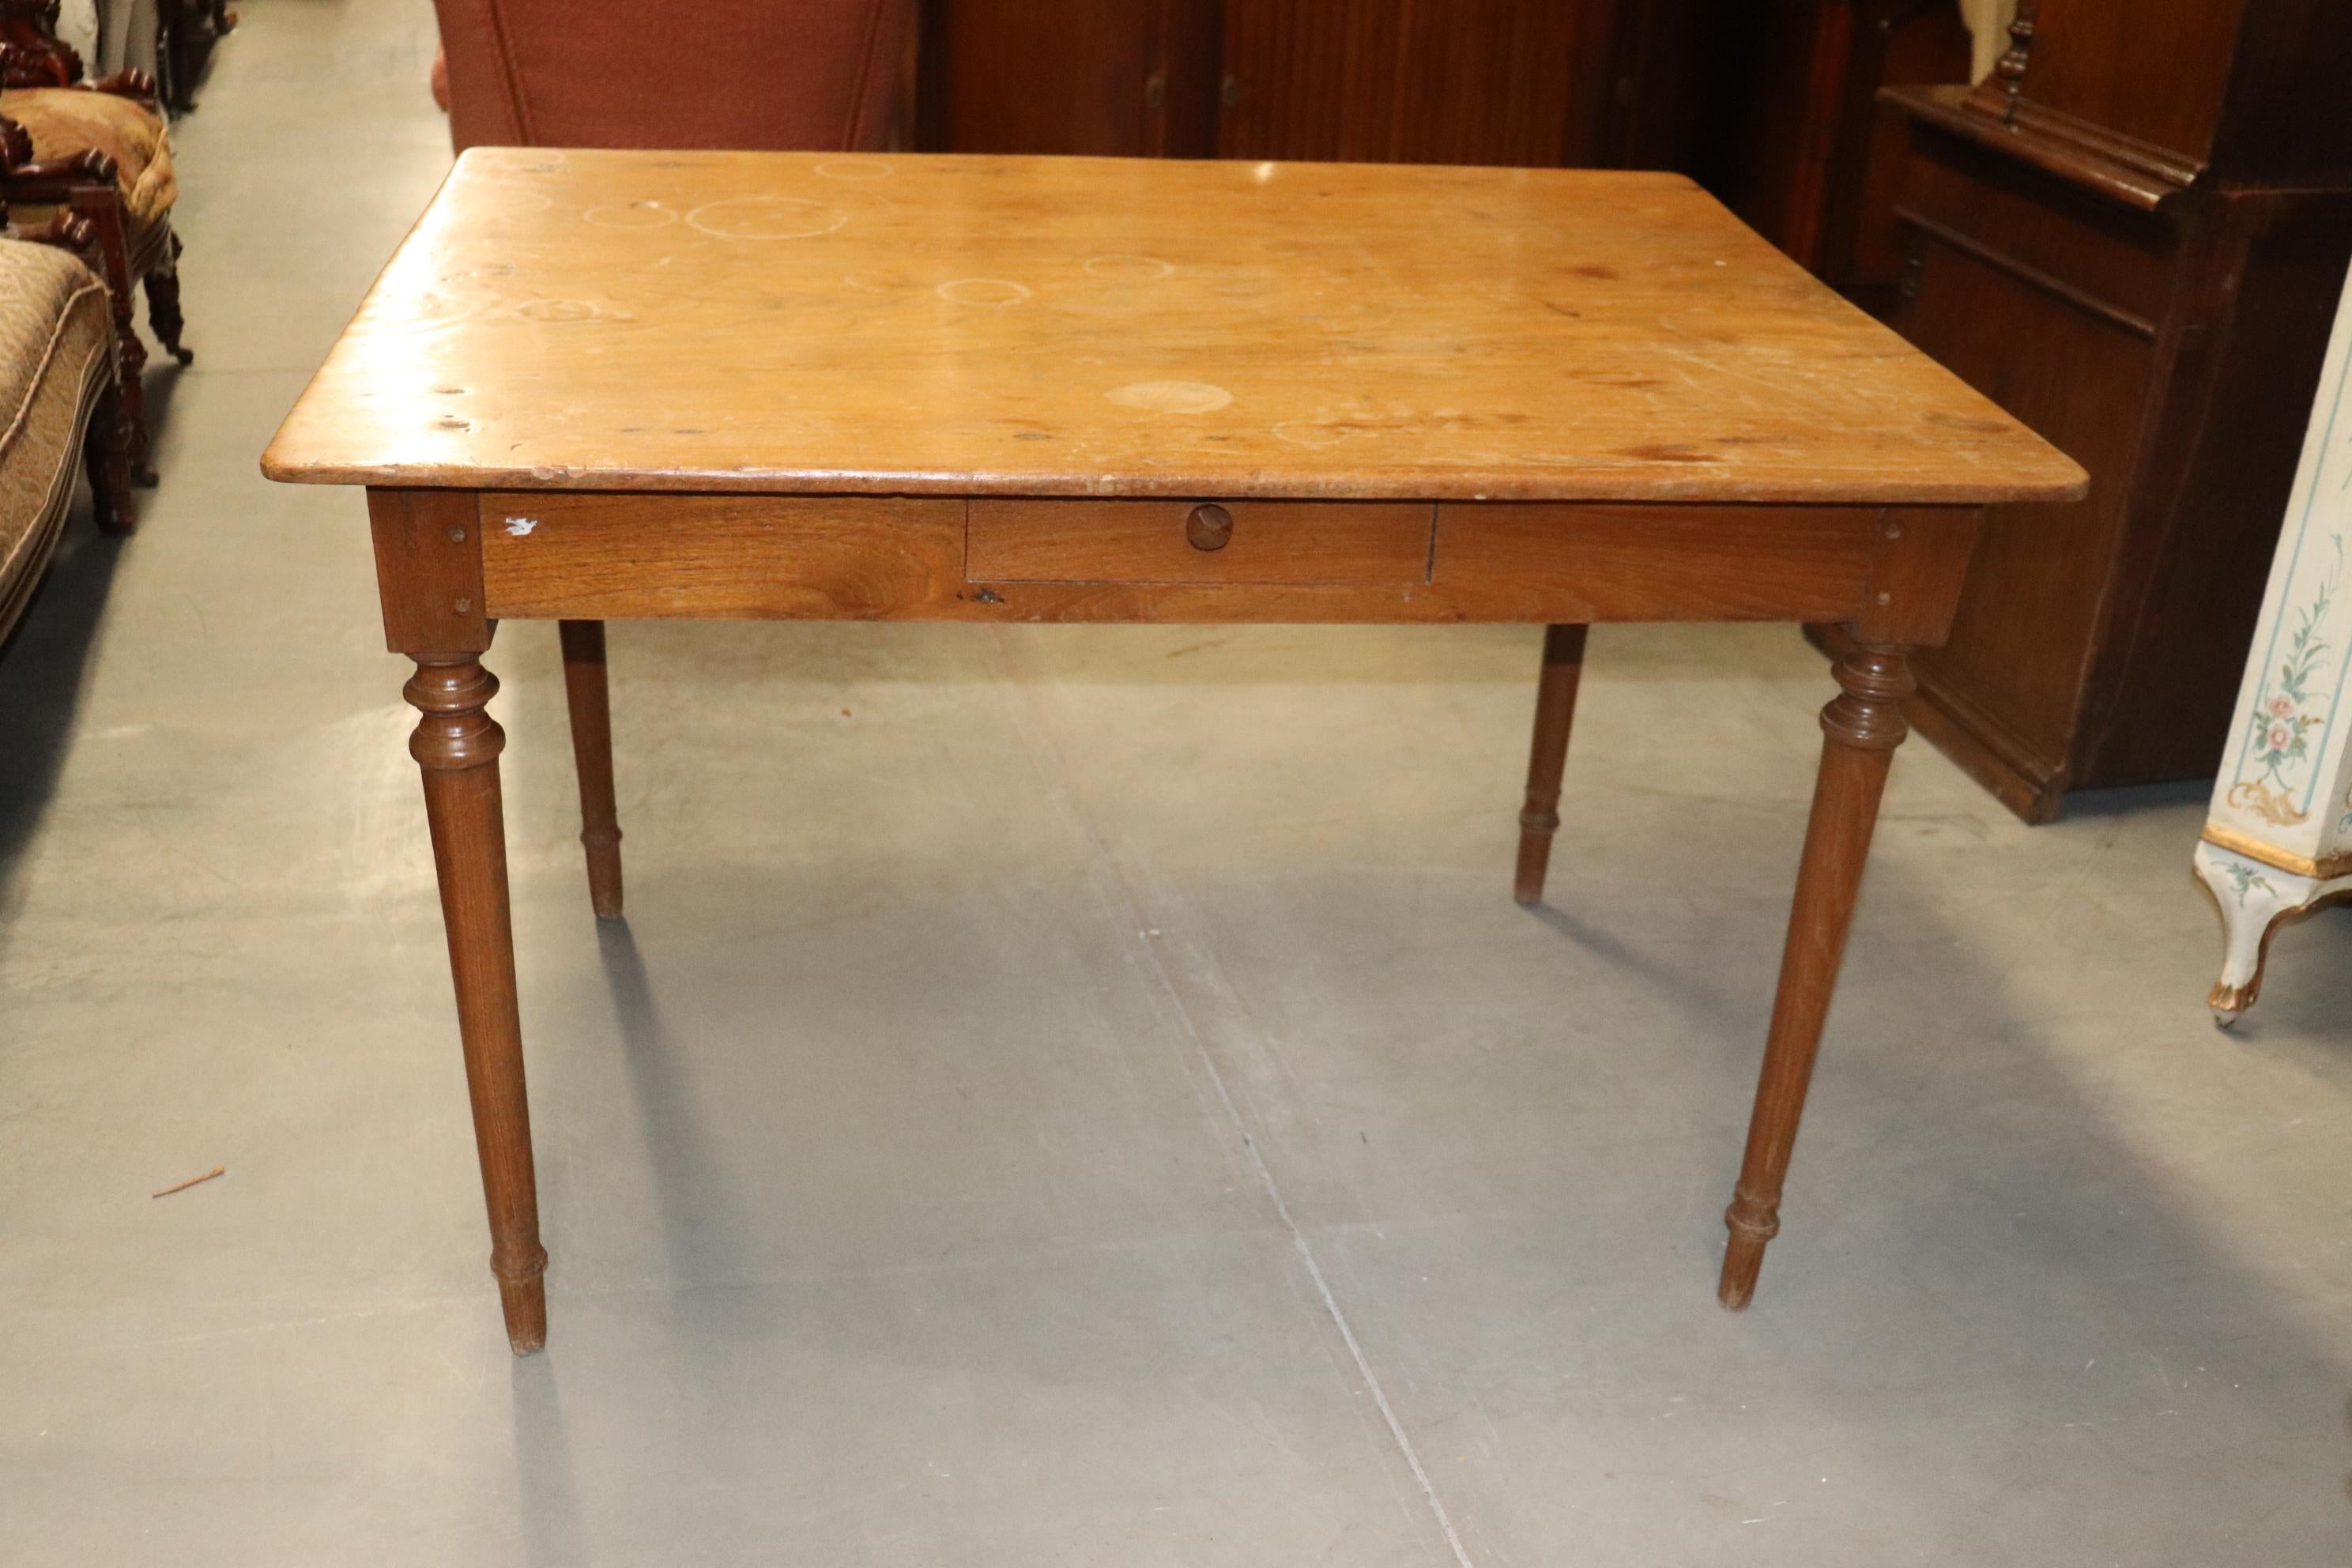 This is a fantastic and ultra rare French country farm table with SINGLE BOARD of either walnut or perhaps chestnut. The top is 45 inches wide so that was a mighty large tree! The table is in its original condition and does have old rings from